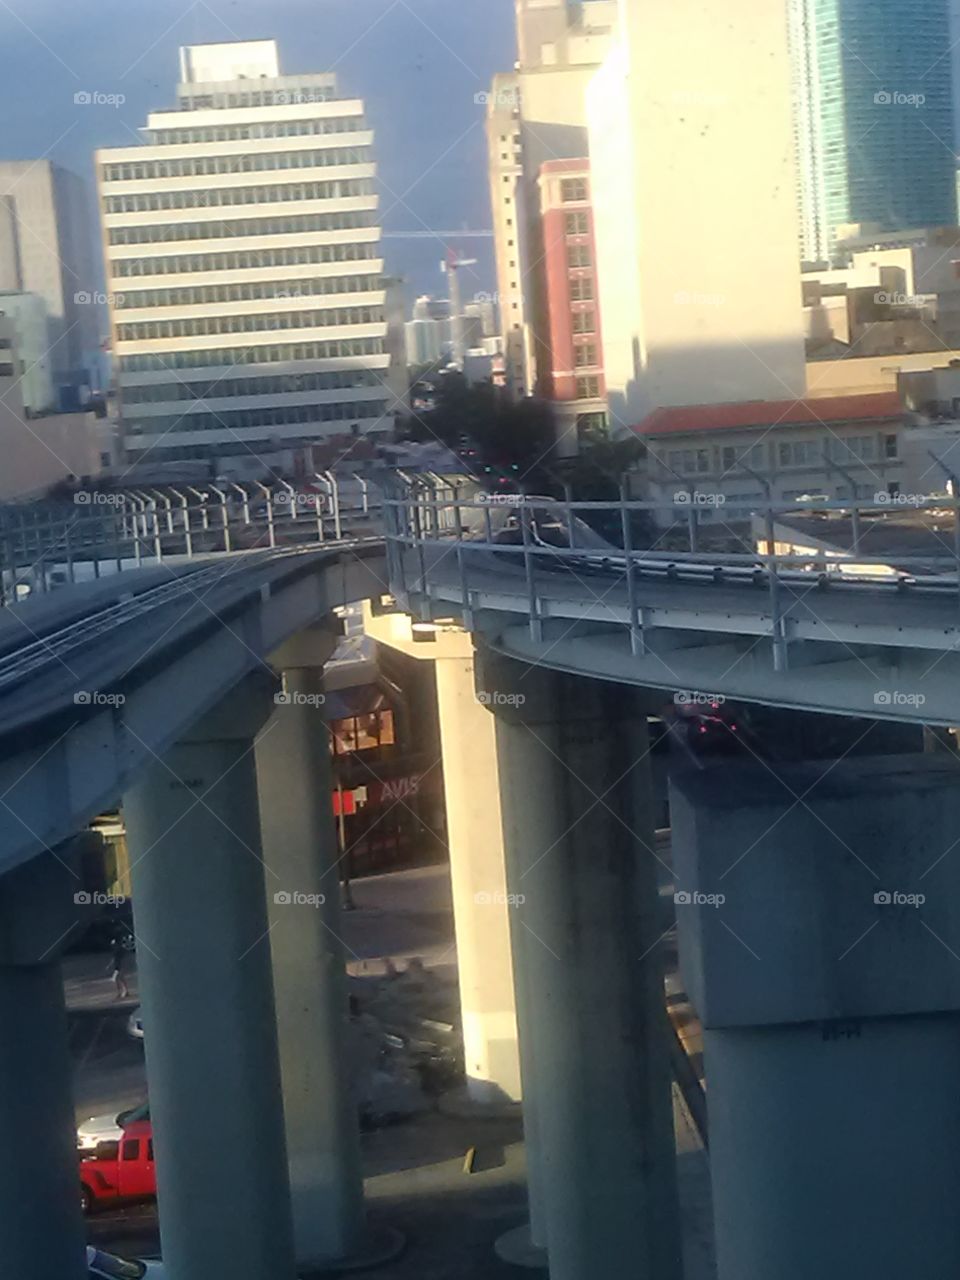 Picture of the city buildings from the city metro mover